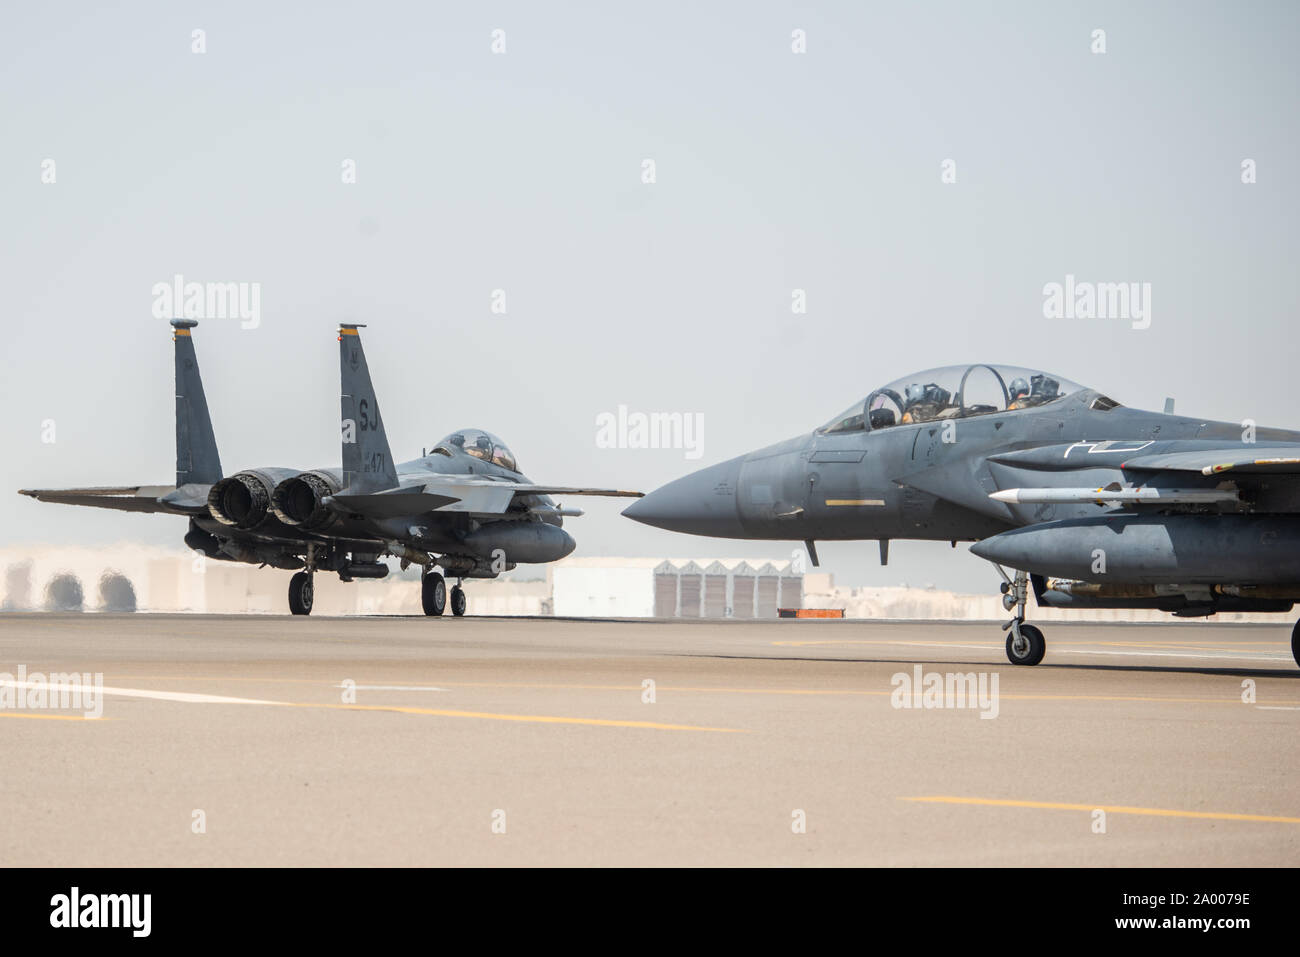 Two F-15E Strike Eagles, assigned to the 336th Expeditionary Fighter Squadron, taxi before flight for Agile Strike Sept. 18, 2019, at Al Dhafra Air Base, United Arab Emirates. The 336th EFS sent two aircraft and personnel to operate missions out of Prince Sultan Air Base, Saudi Arabia to challenge their flexibility at expanding tactical and strategic reach while strengthening coalition and regional partnerships in the Air Forces Central Command area of responsibility through adaptive basing. (U.S. Air Force photo by Staff Sgt. Chris Thornbury) Stock Photo